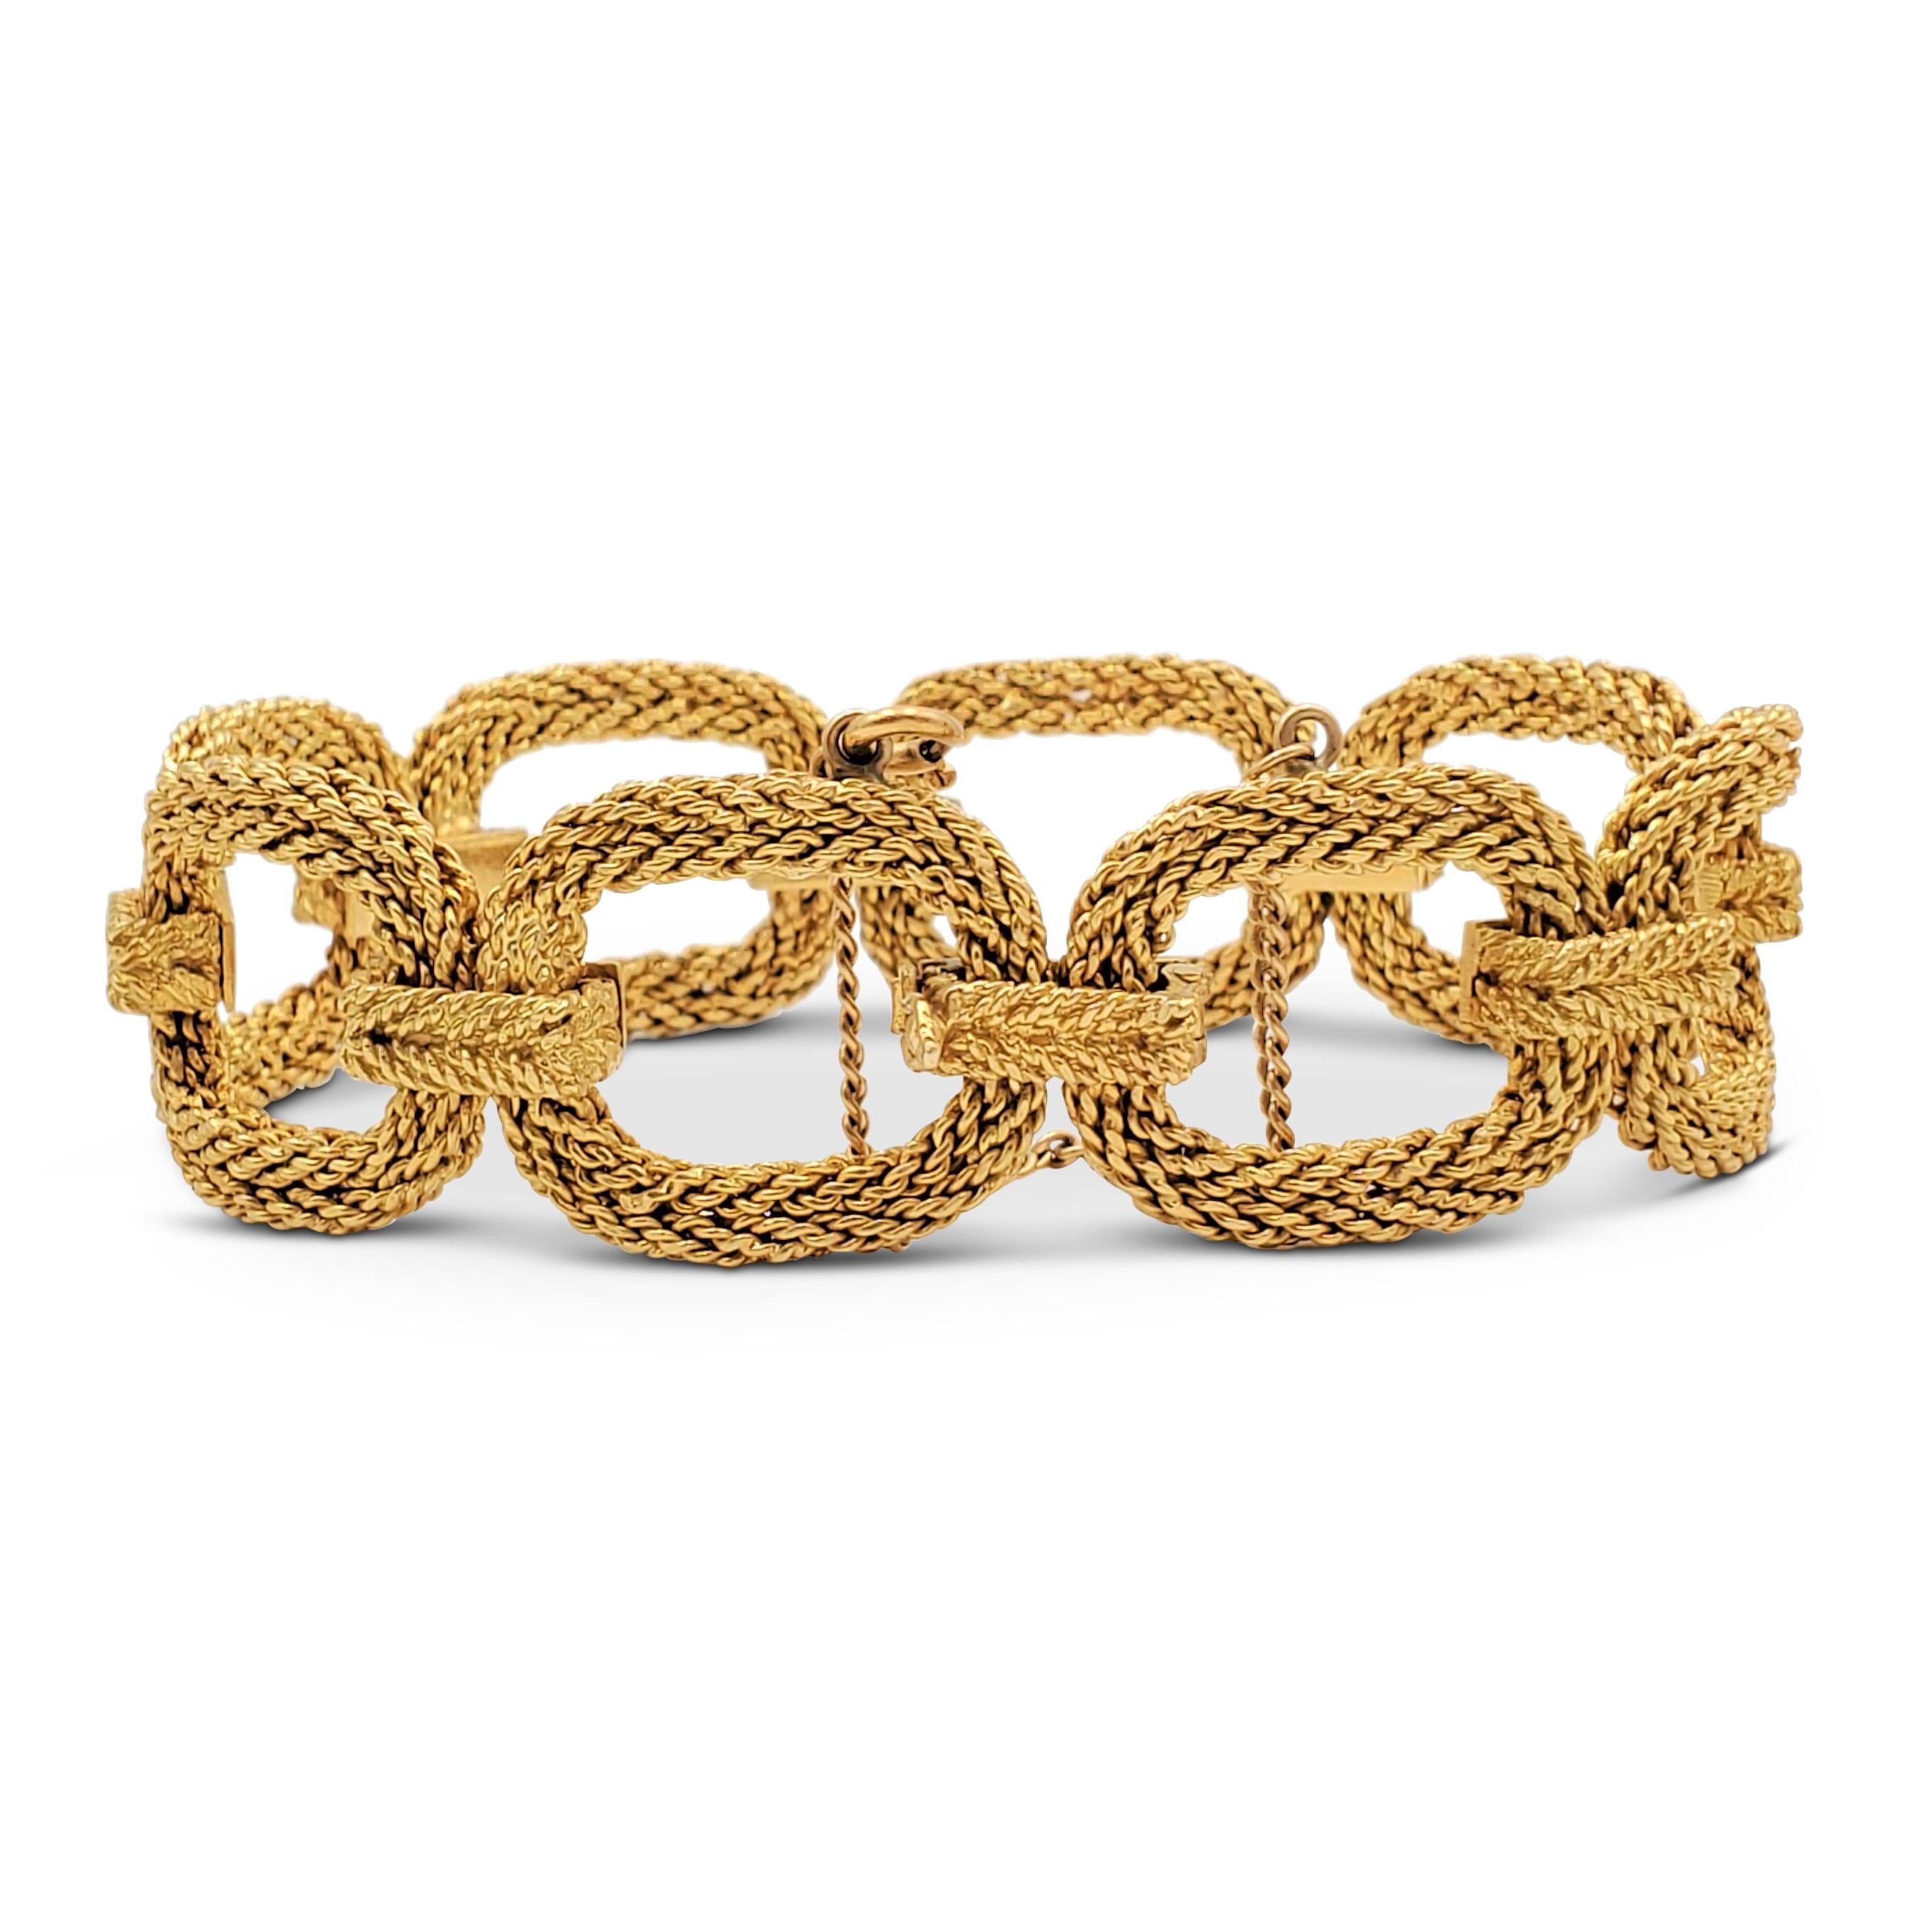 A chic and wearable vintage bracelet crafted in 18 karat woven yellow gold features geometric oval links. French eagle's head hallmark. The bracelet measures 7 1/2 inches in length. Patina consistent with age and wear. The bracelet is not presented